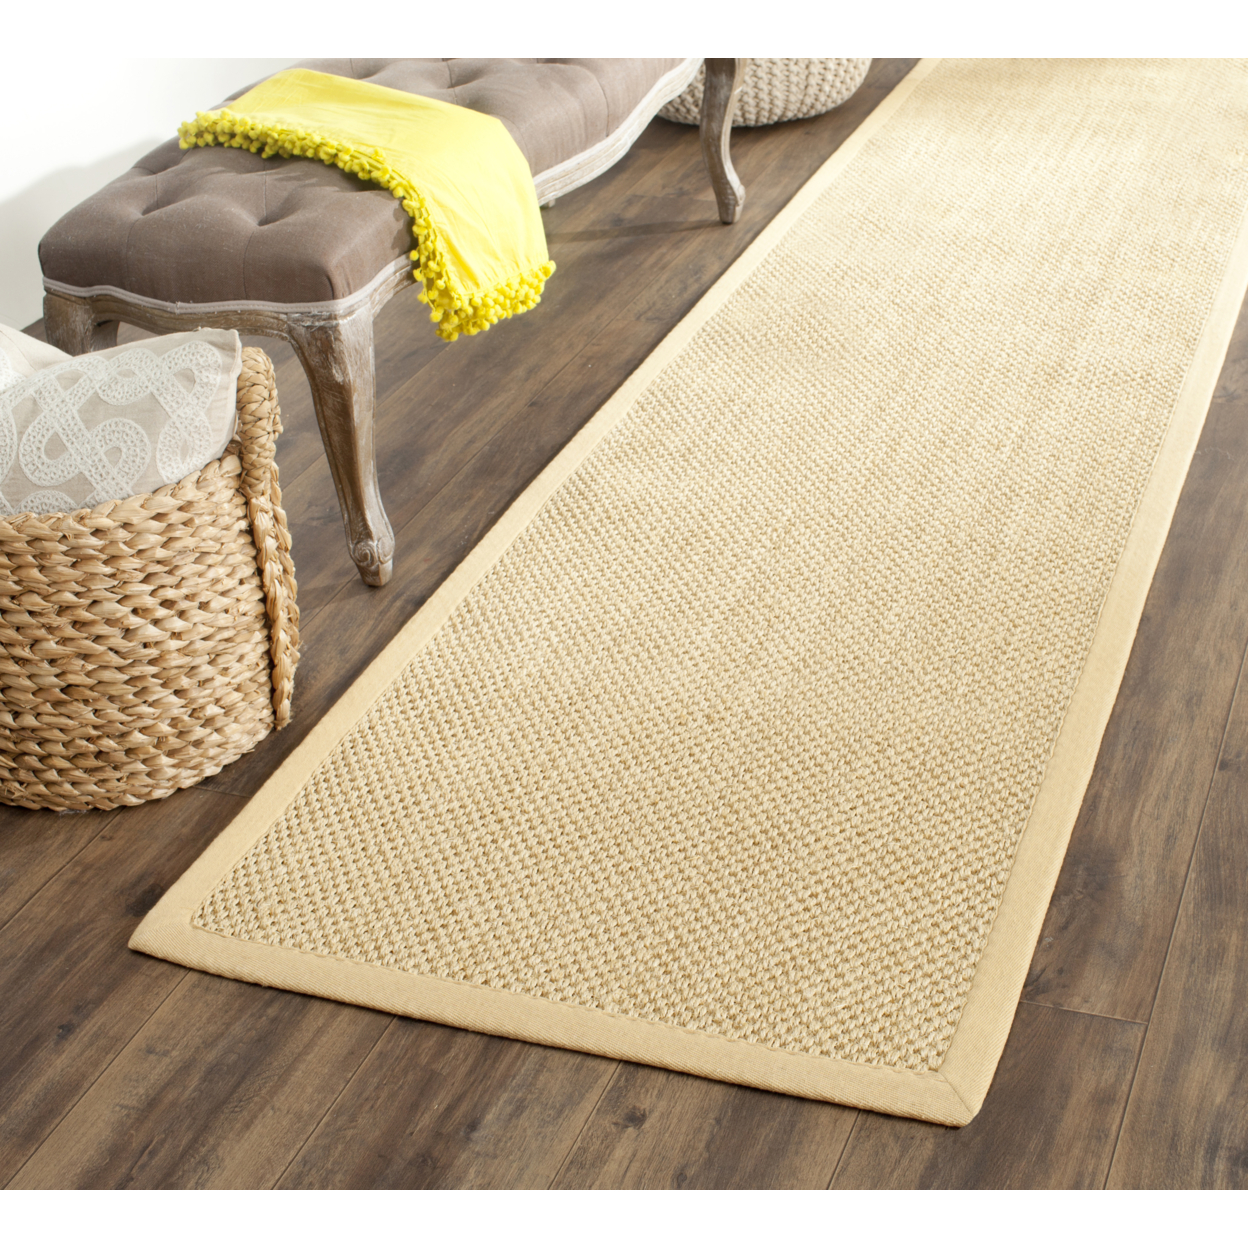 SAFAVIEH Natural Fiber Collection NF443A Maize/Wheat Rug - 2' 6 X 10'